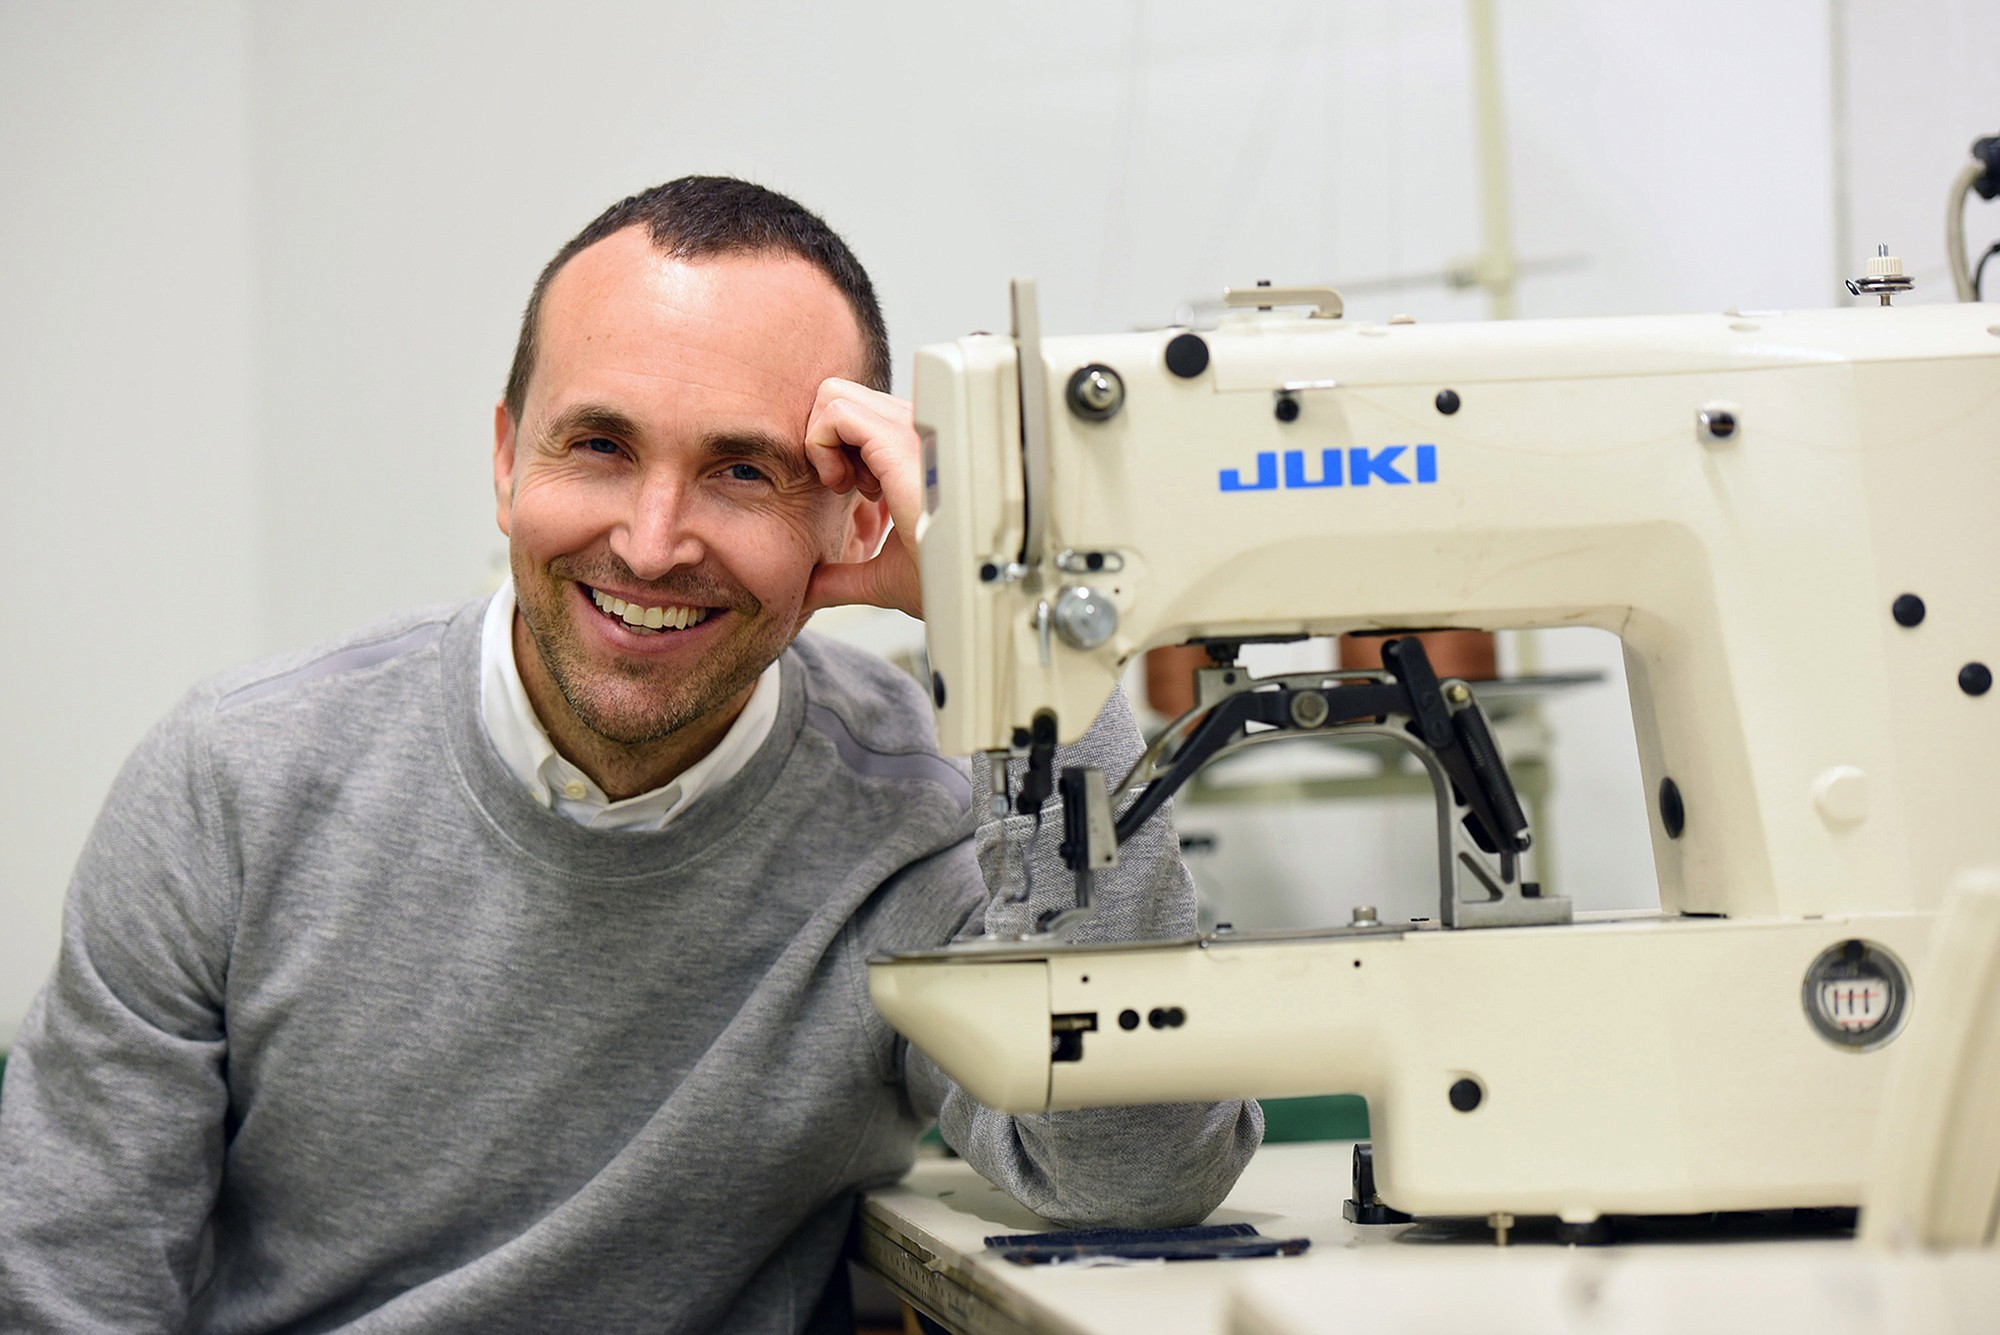 Todd Shelton poses next to one of his company's sewing machines on May 5 in East Rutherford, N.J.